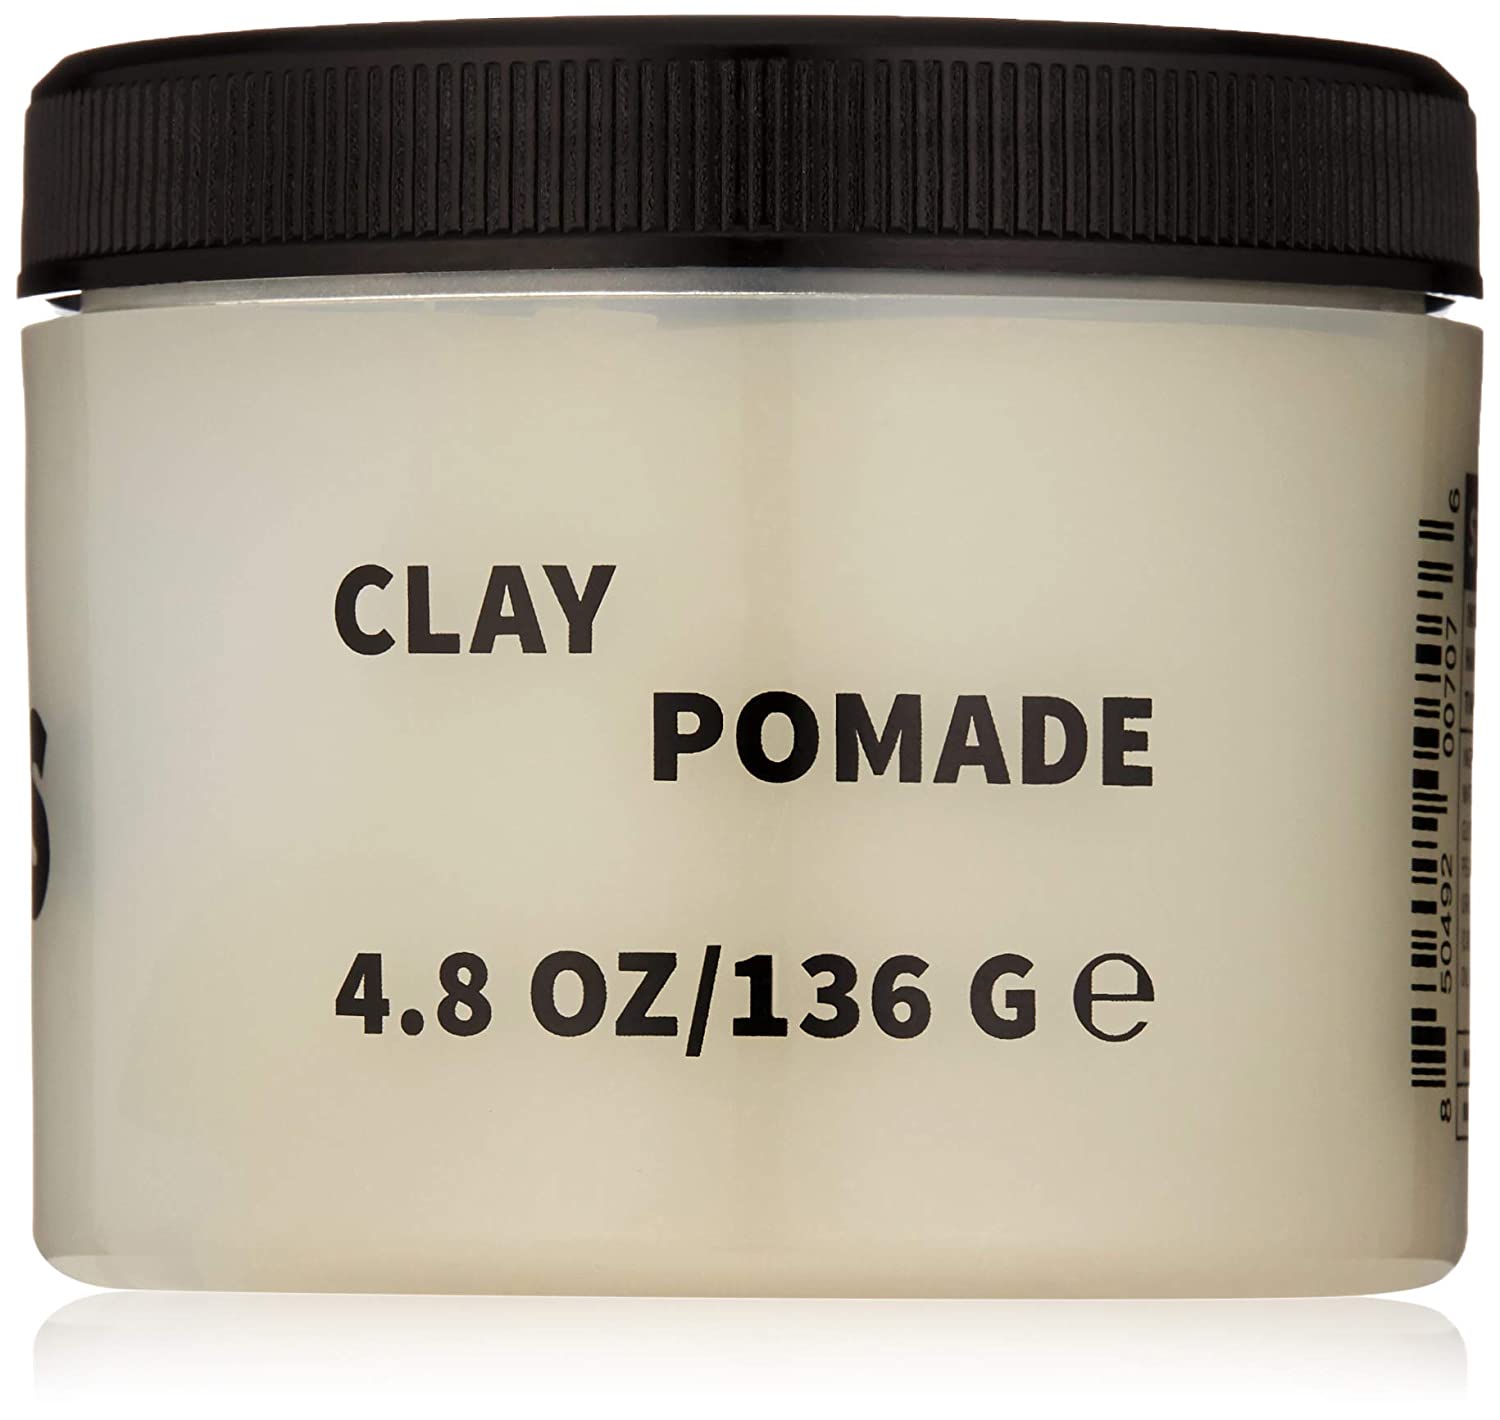 Top 10 Best Pomade For Thin Fine Hair Reviews in 2021